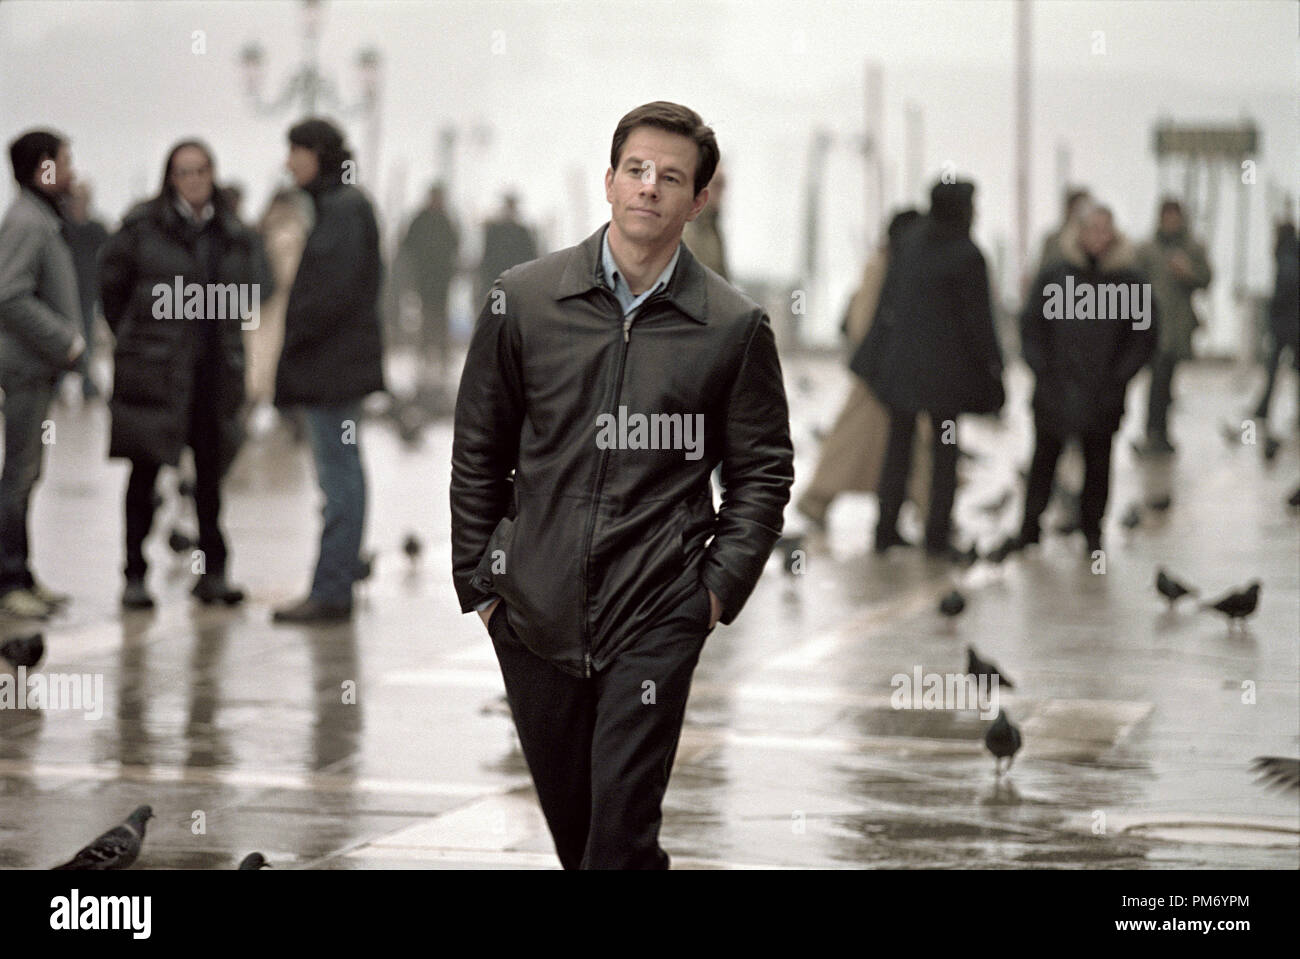 Studio Publicity Still from 'The Italian Job' Mark Wahlberg © 2003 Paramount Photo by Claudette Barius File Reference # 307531077THA  For Editorial Use Only -  All Rights Reserved Stock Photo